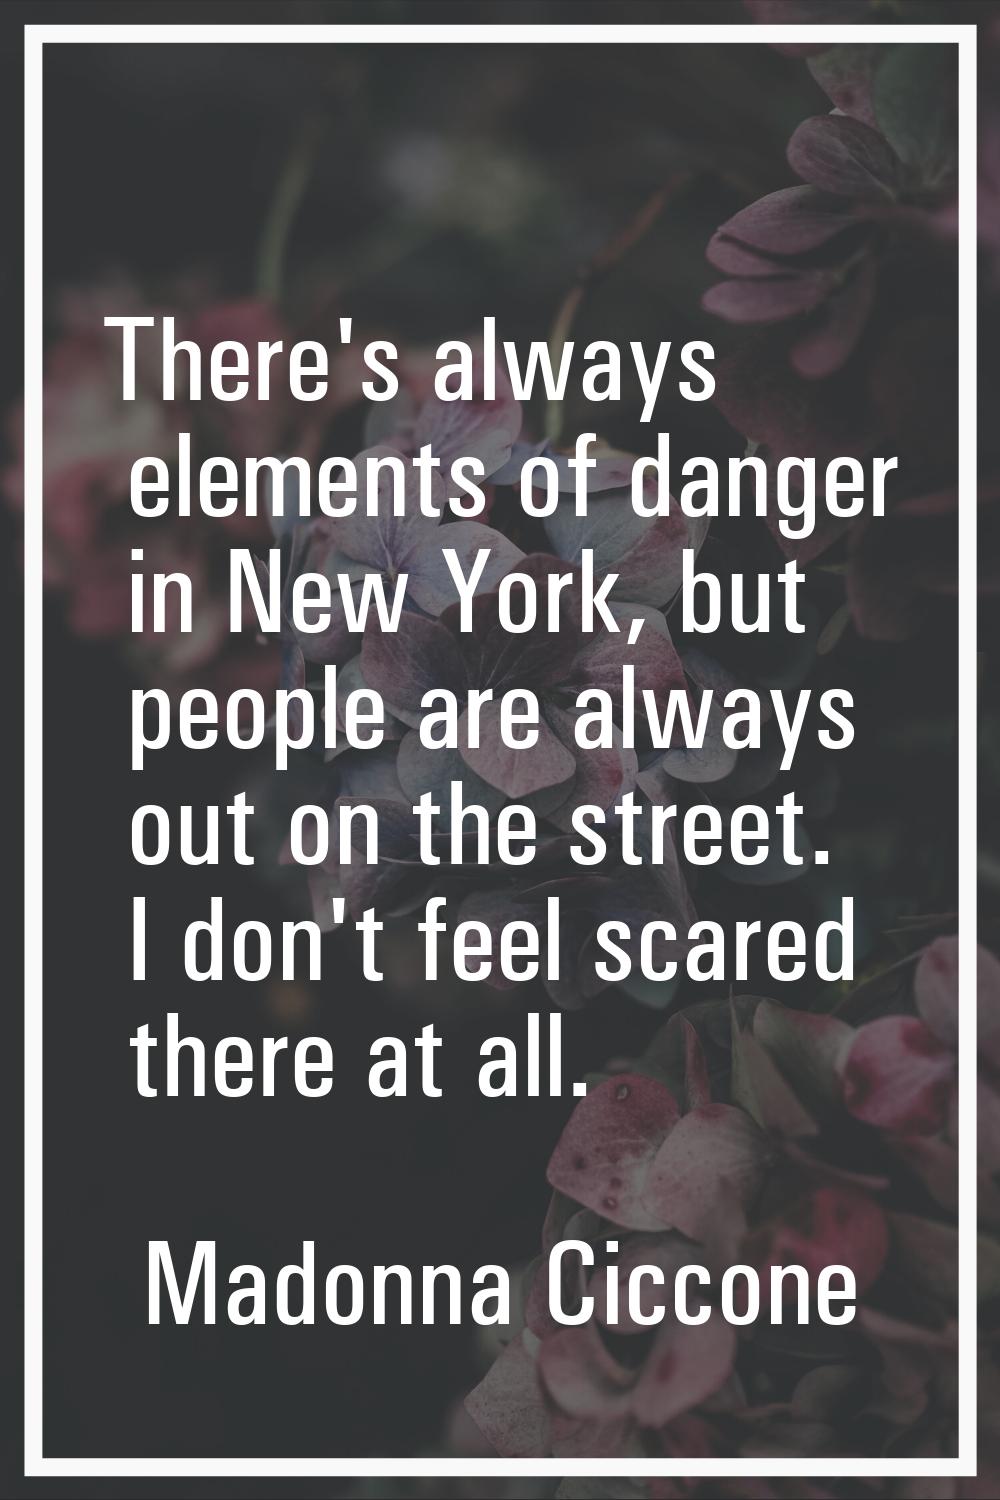 There's always elements of danger in New York, but people are always out on the street. I don't fee